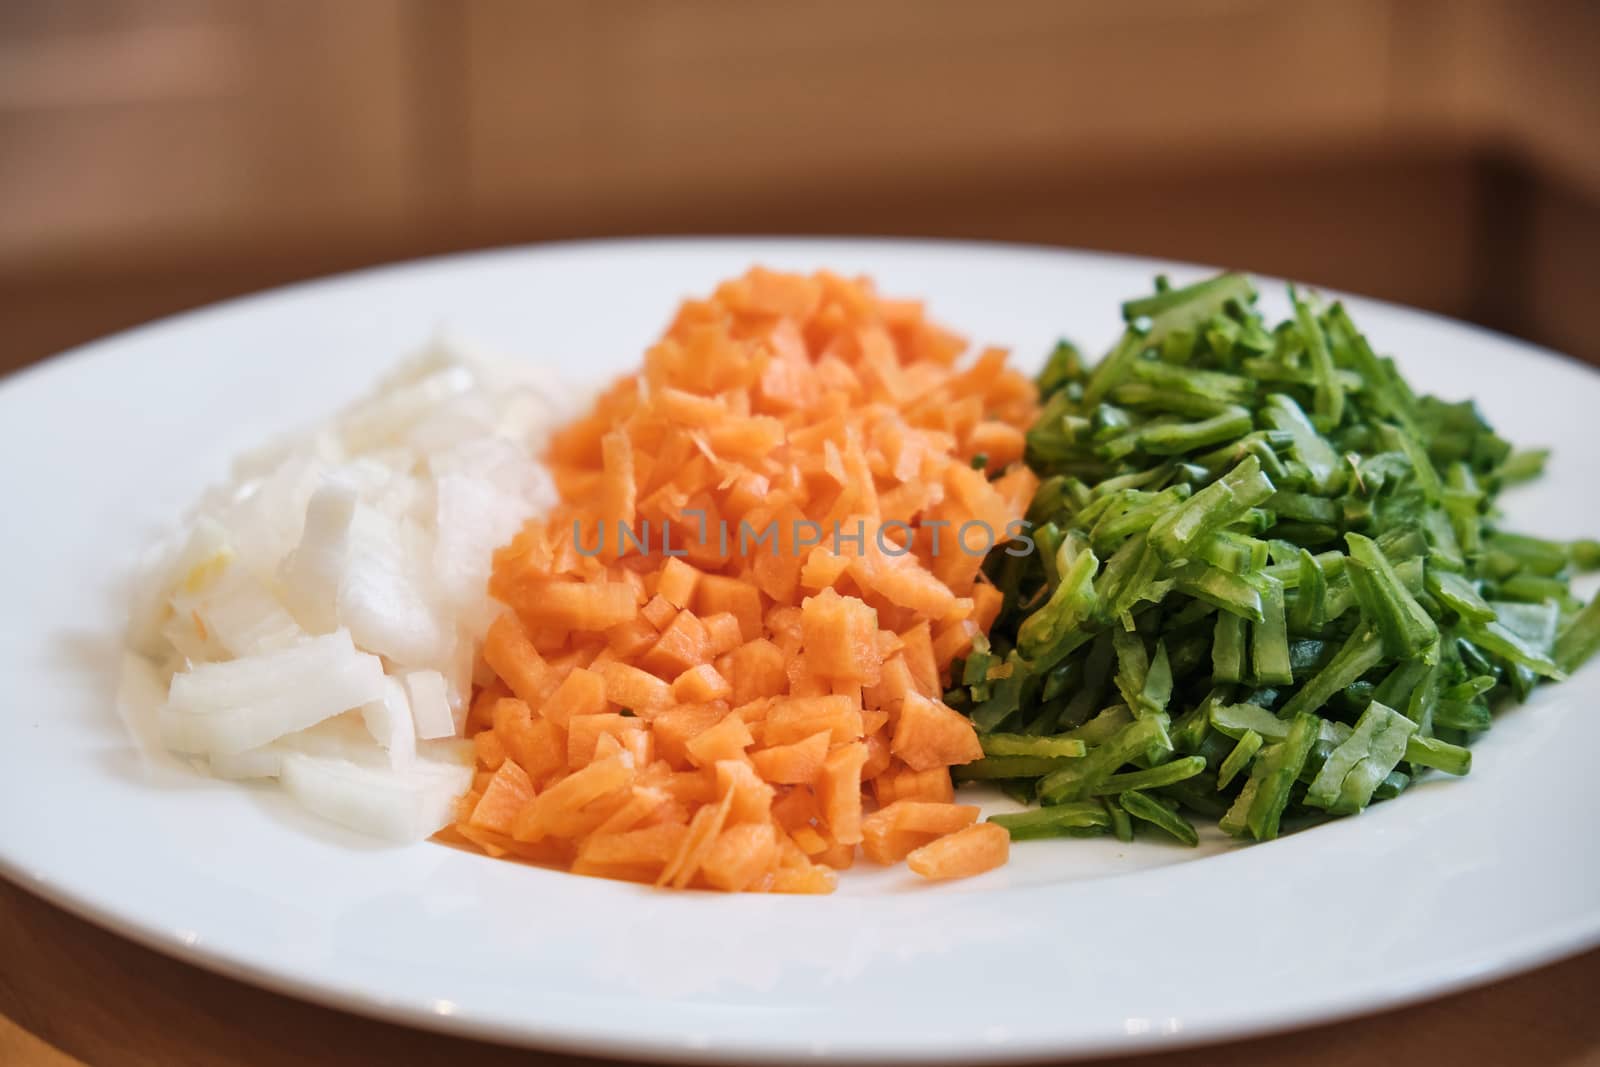 A plate of chopped onions, carrots and beans on a table.